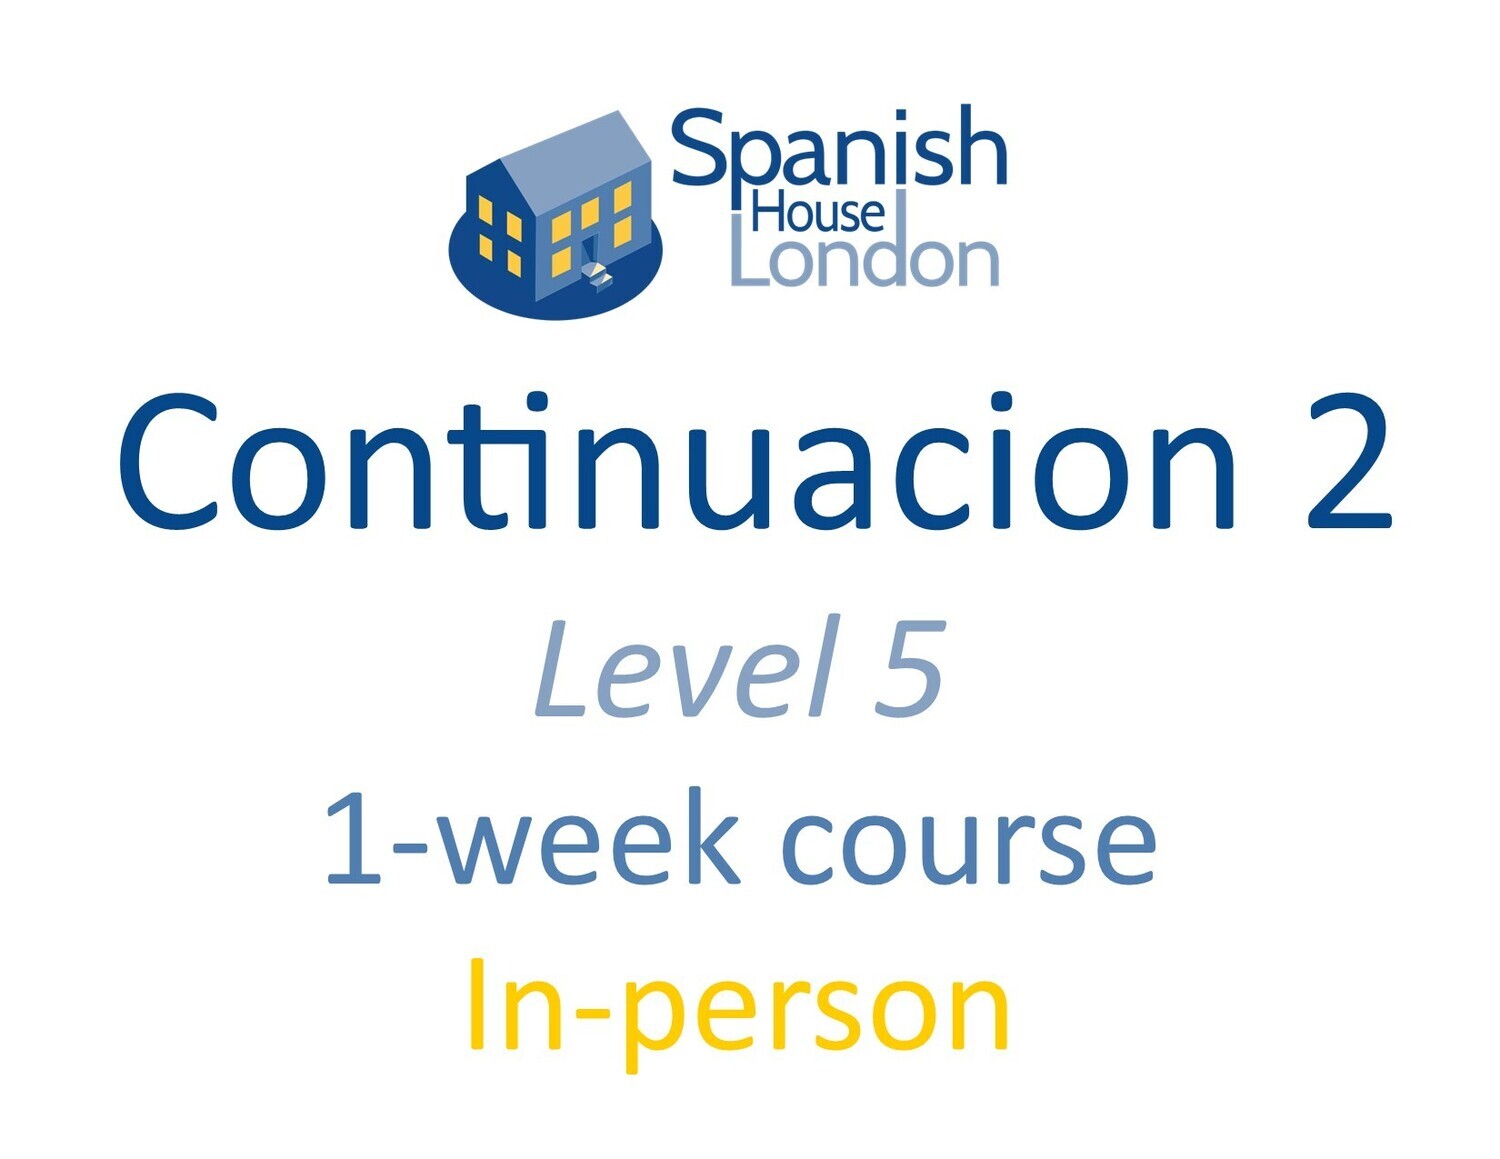 One-Week Intensive Continuacion 2 Course starting on 6th February at 10.30am in Clapham North